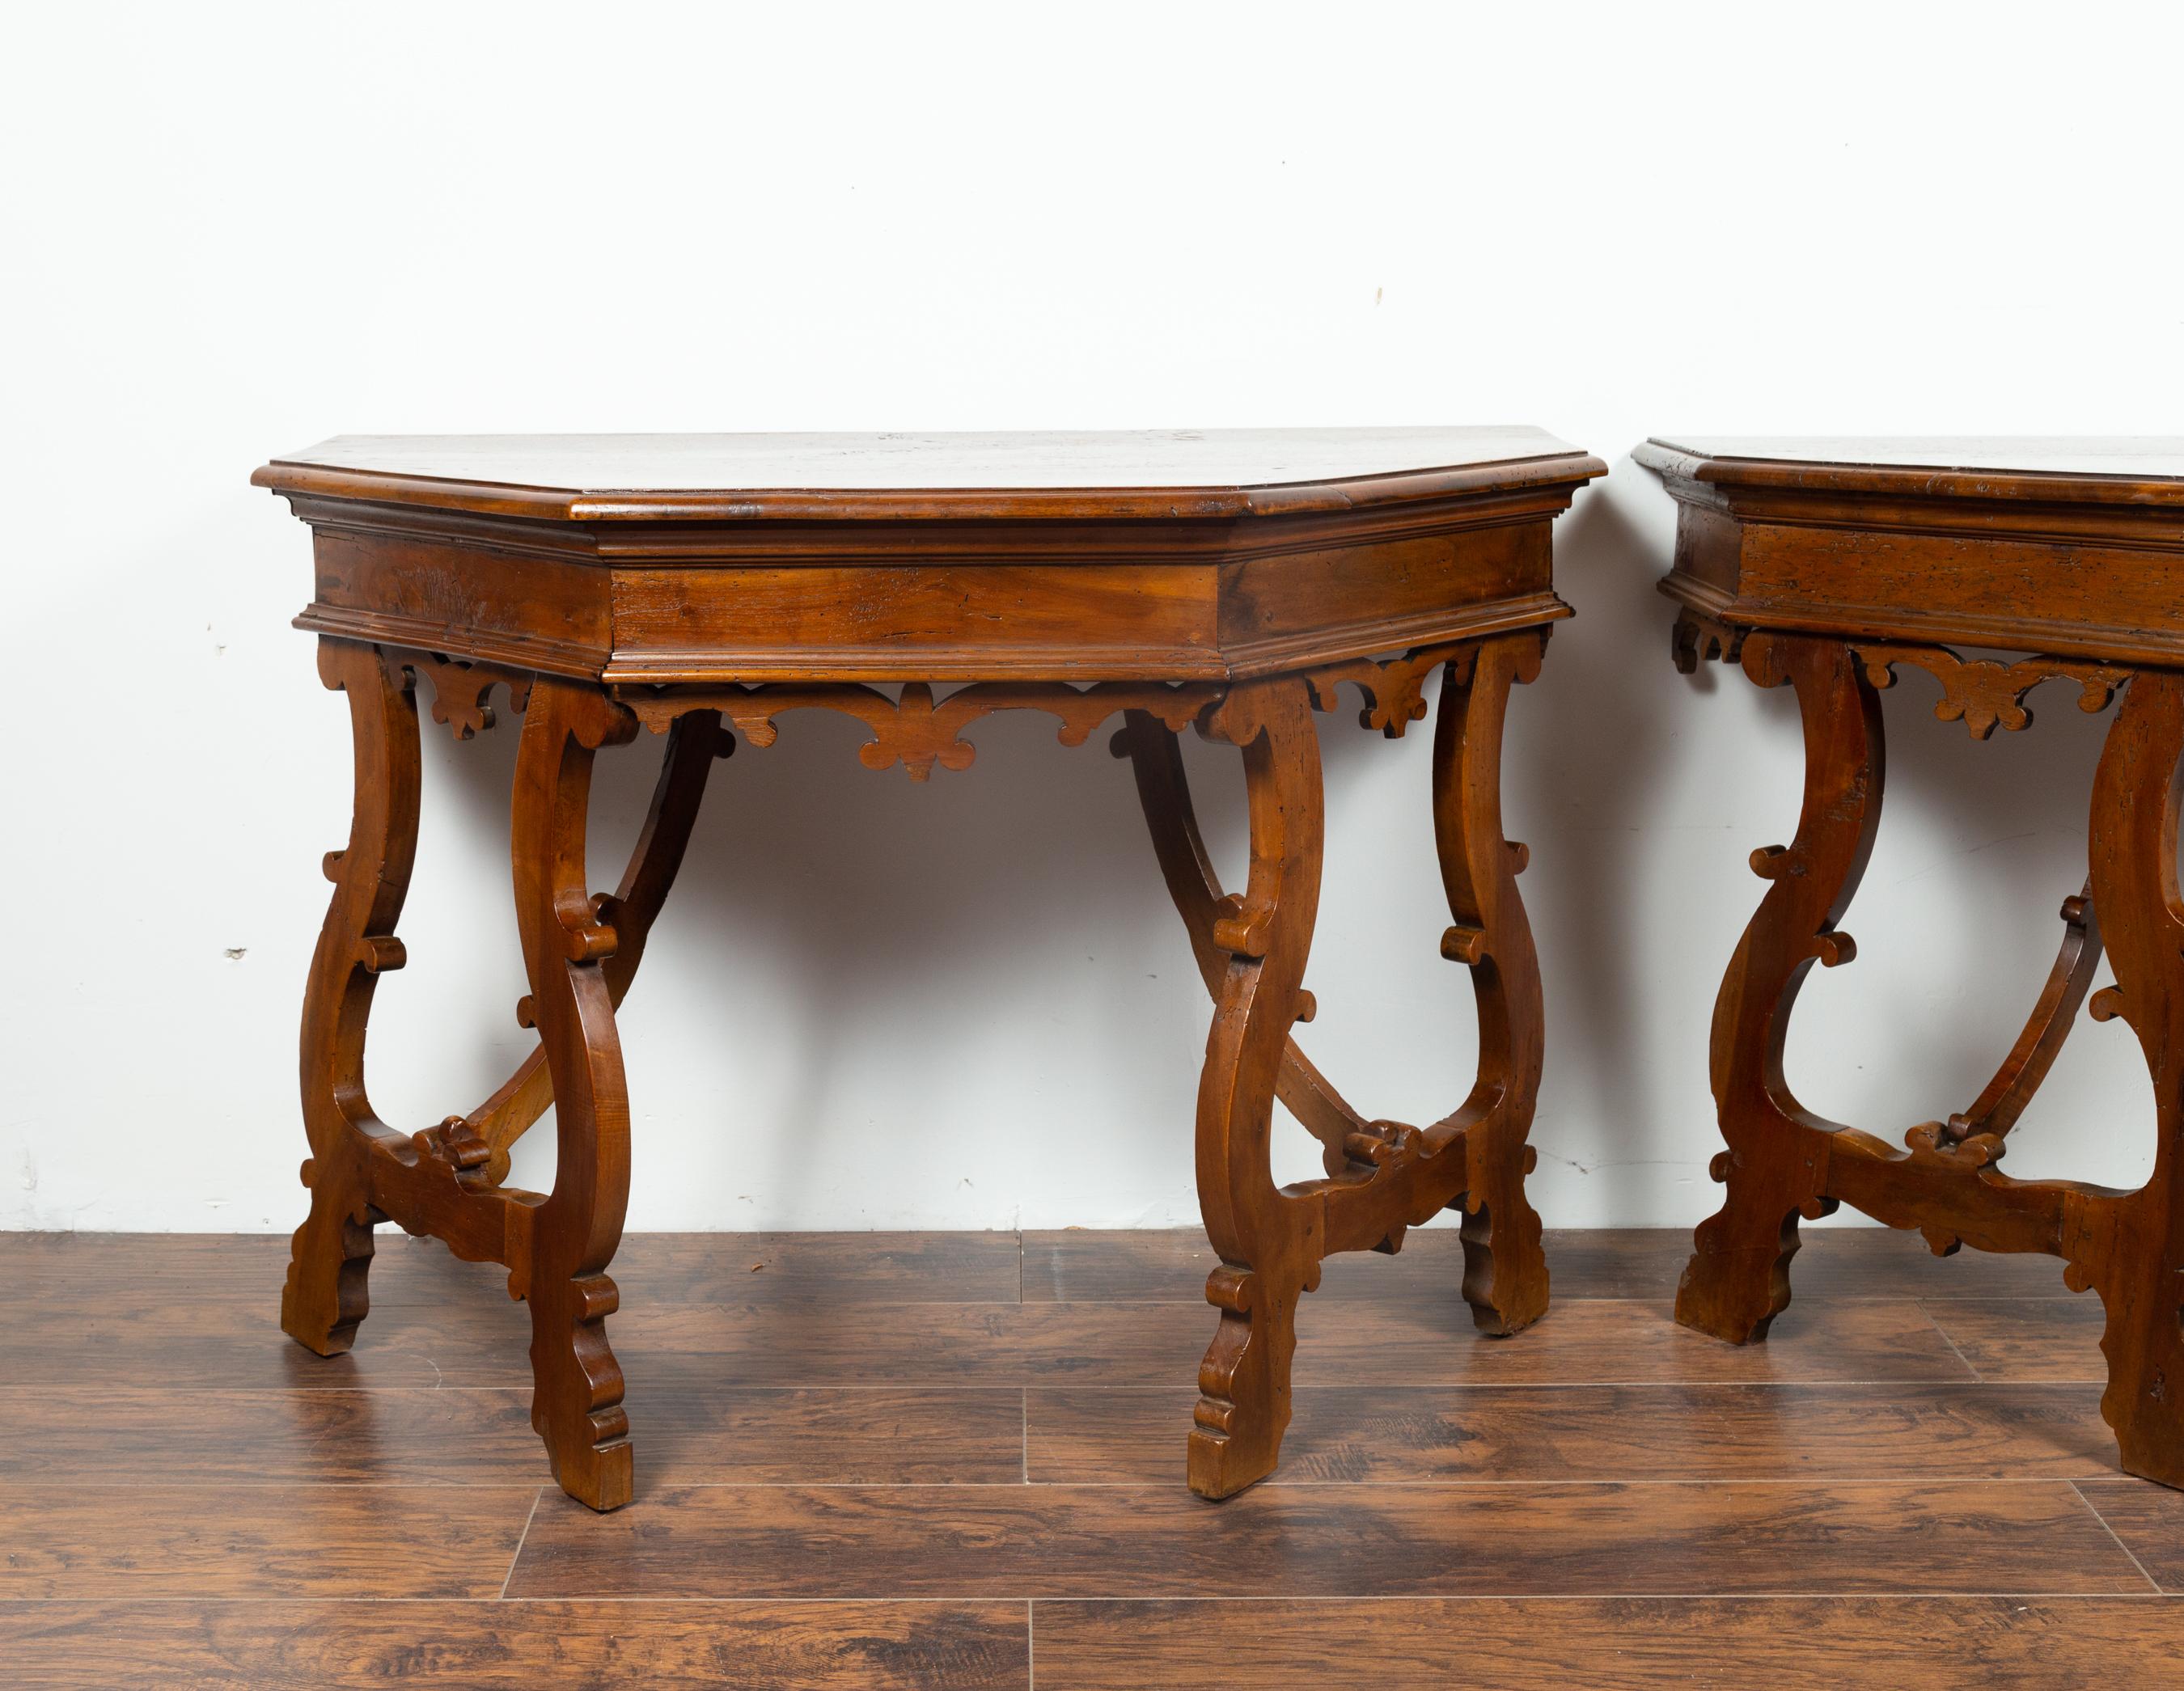 Carved Pair of Italian mid 1800's Walnut Demi lune Tables with Lyre Shaped Legs